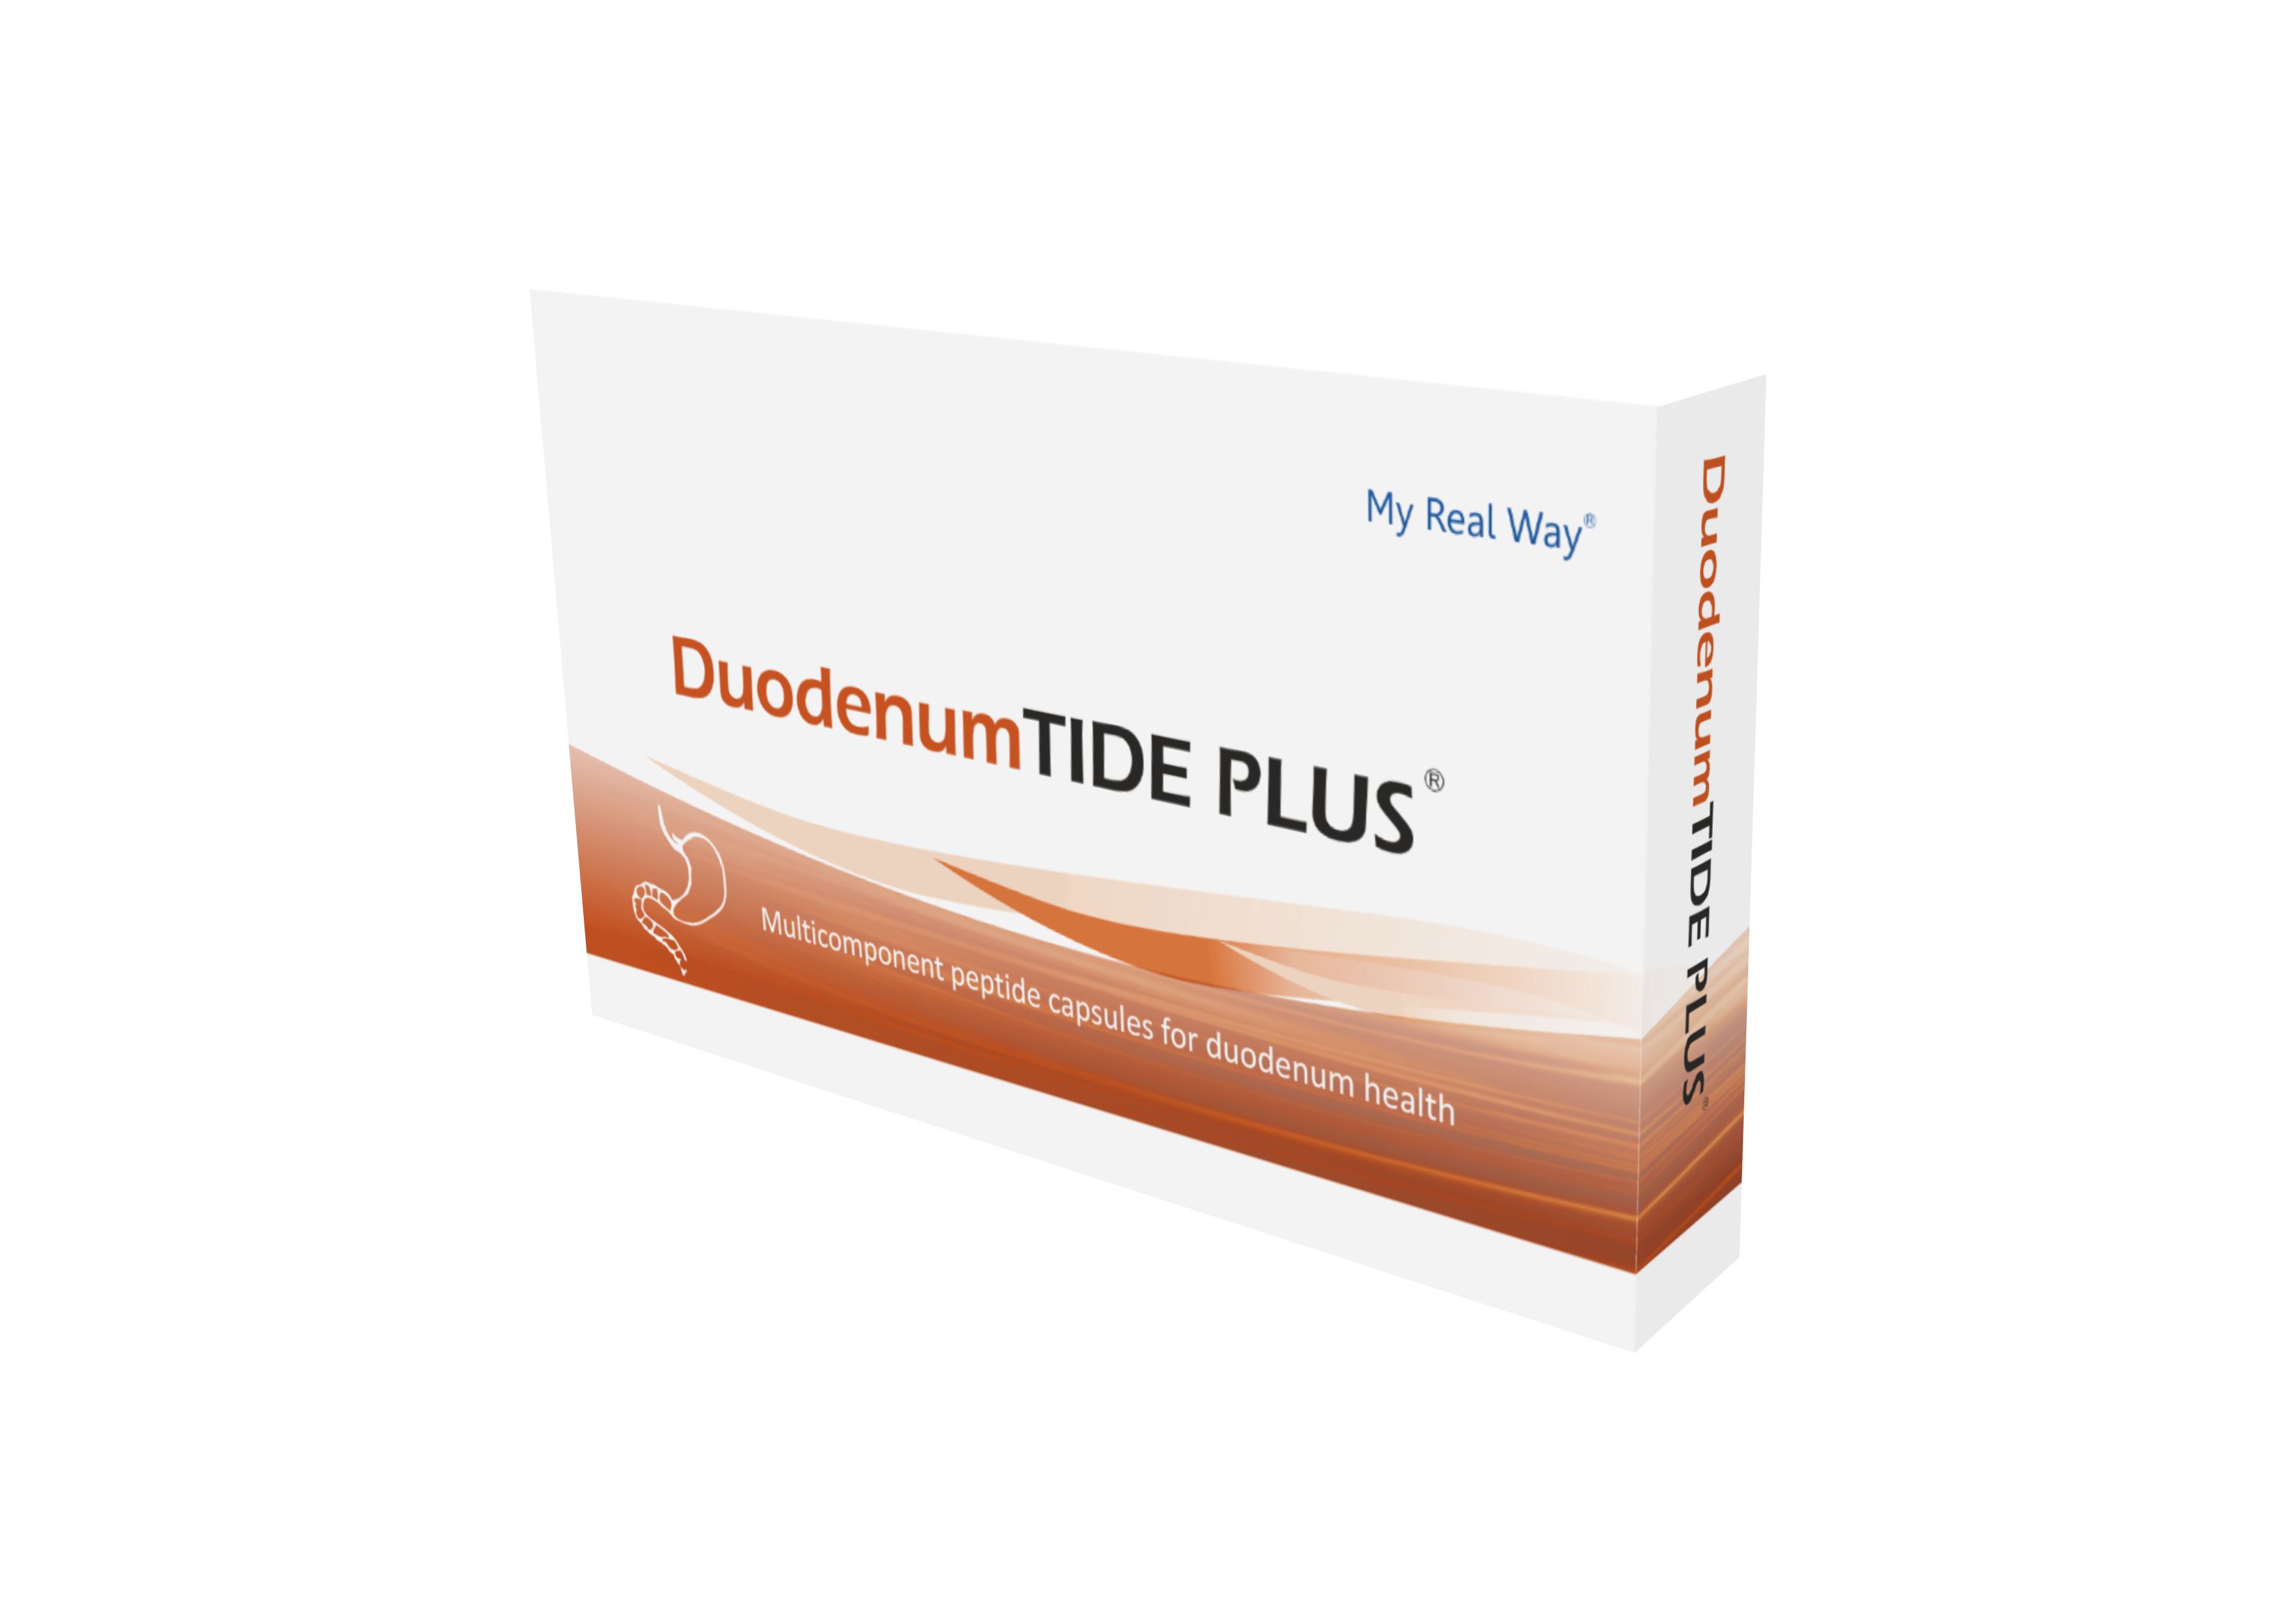 DuodenumTIDE PLUS peptides for the duodenum